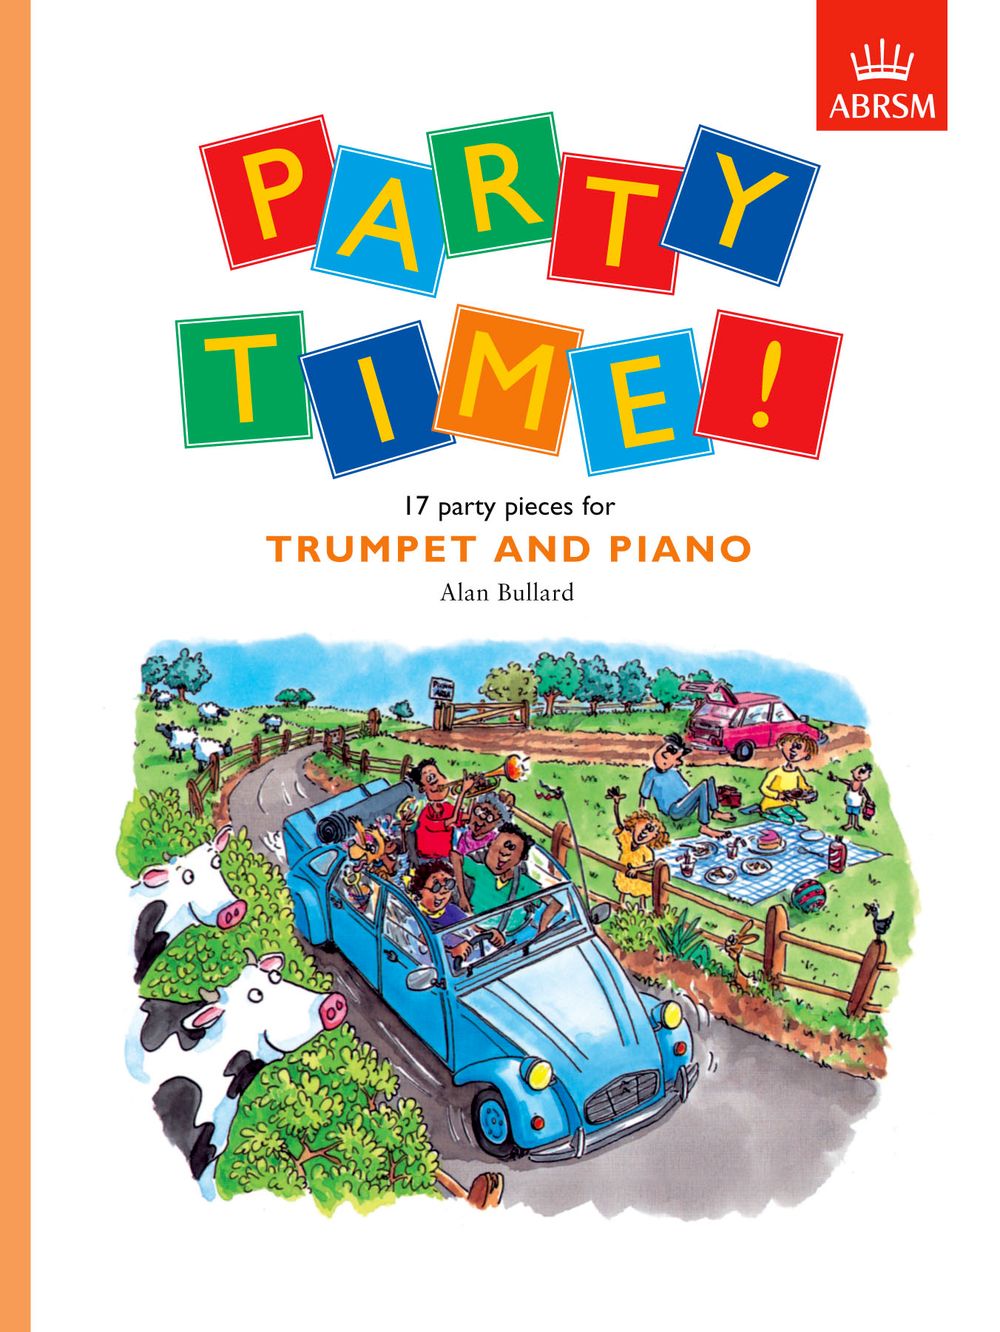 Alan Bullard: Party Time! 17 party pieces for trumpet and piano: Trumpet: